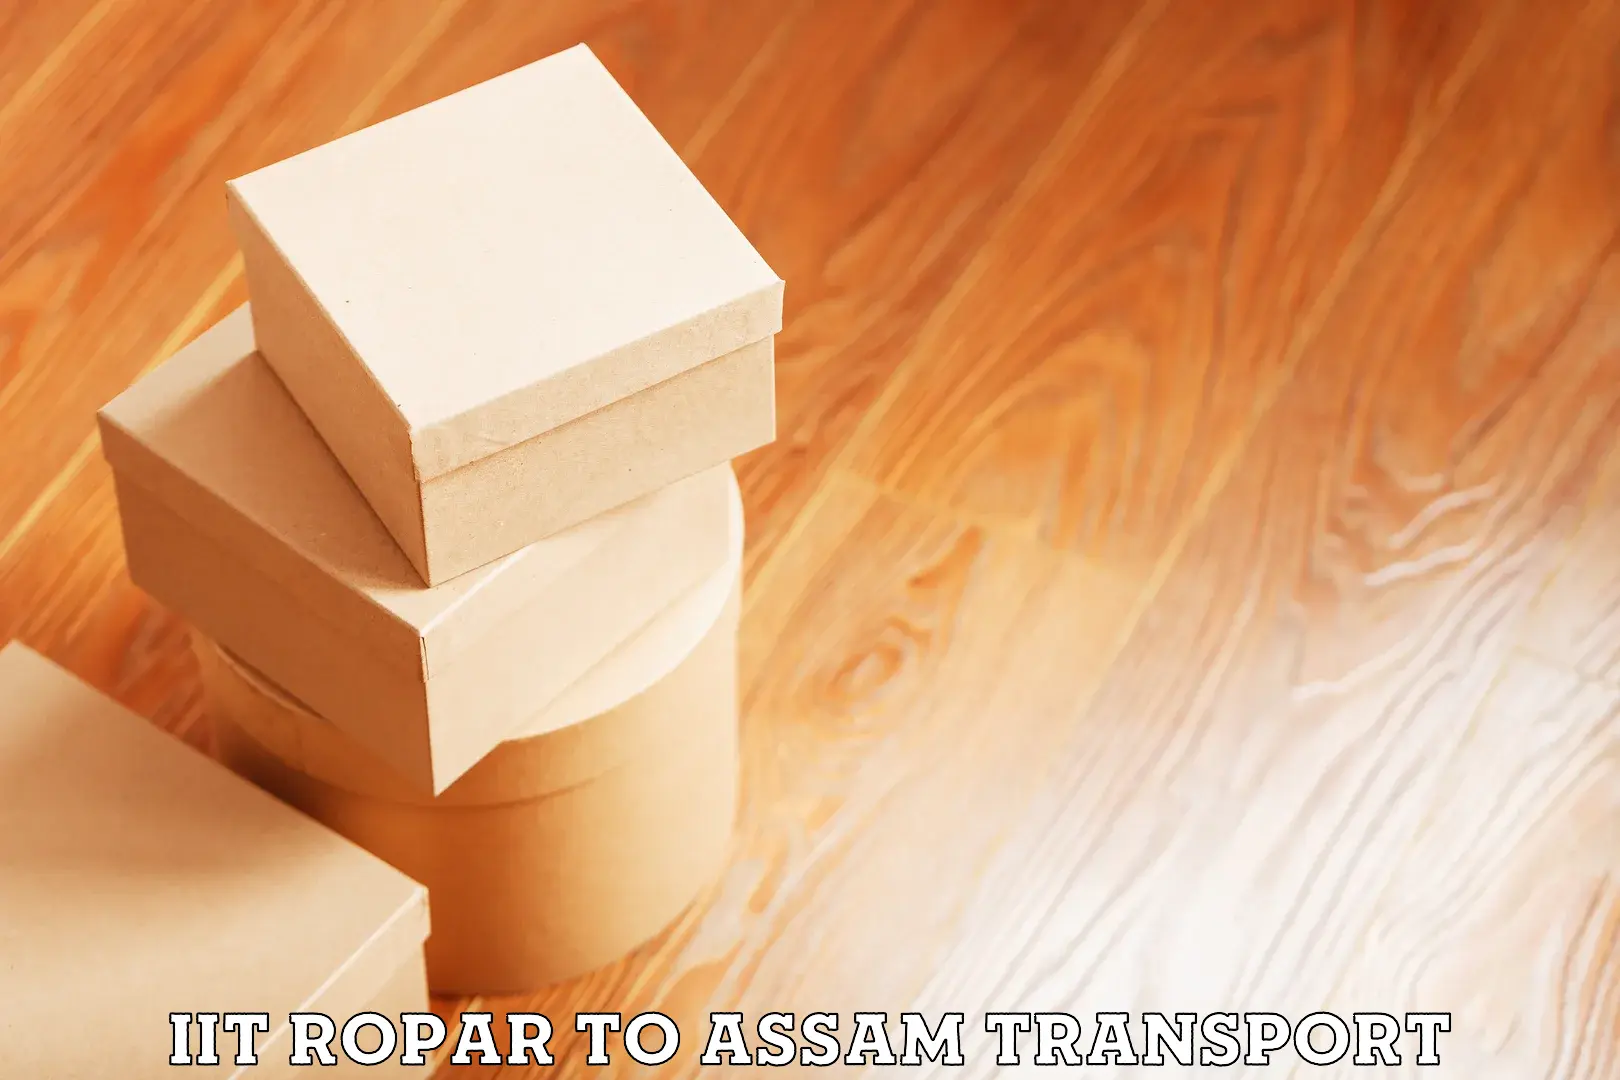 Container transport service IIT Ropar to Golakganj